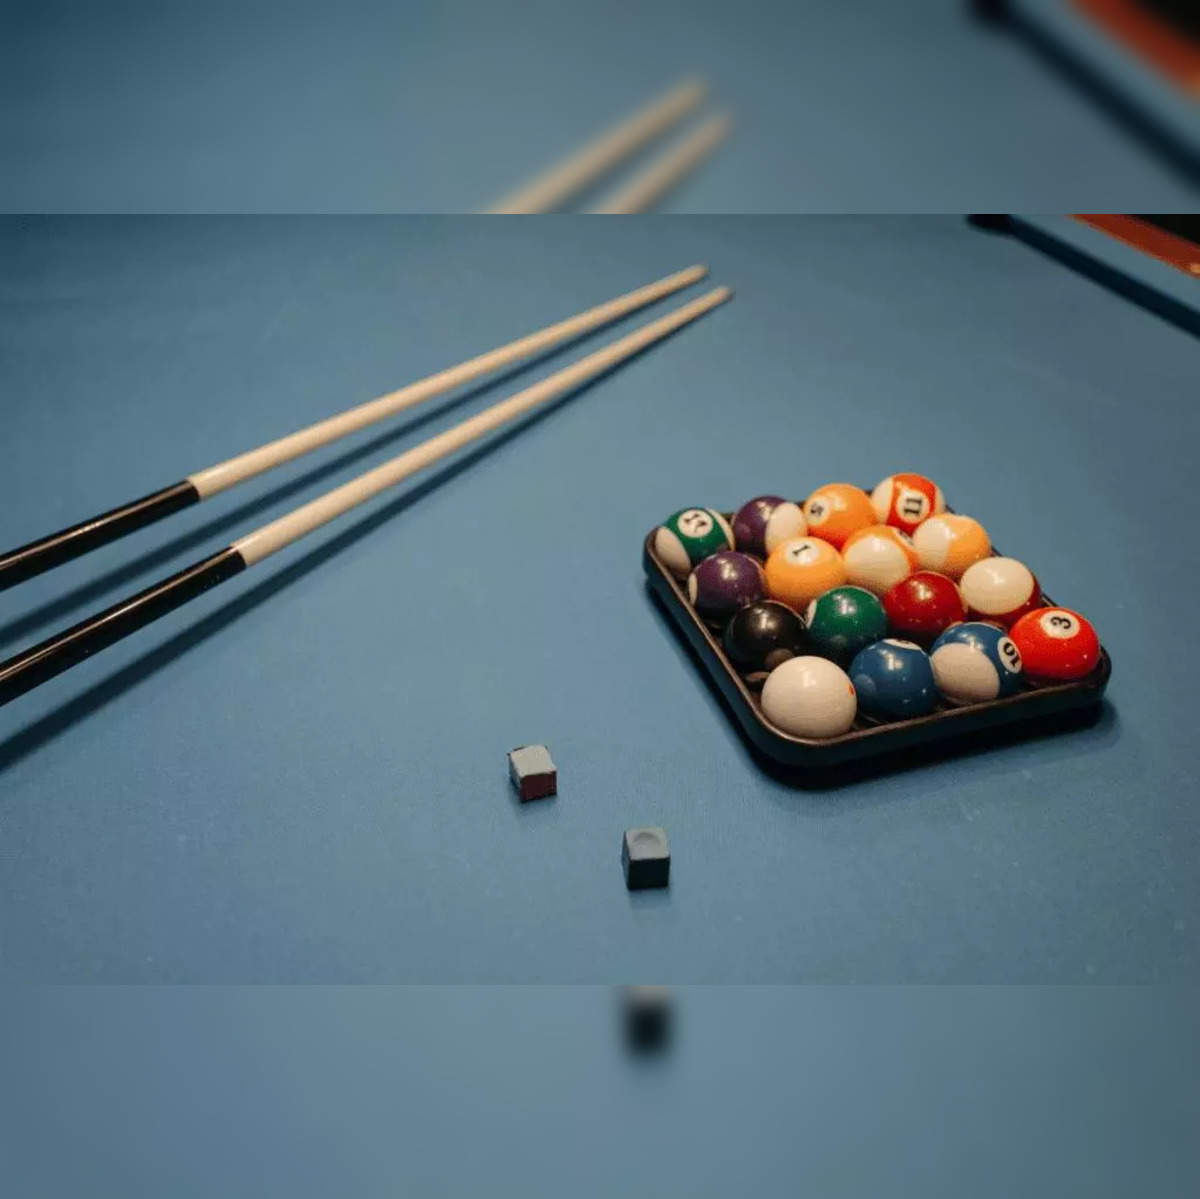 Beginner's Guide to Pool Cues - Buying Your First Pool Cue